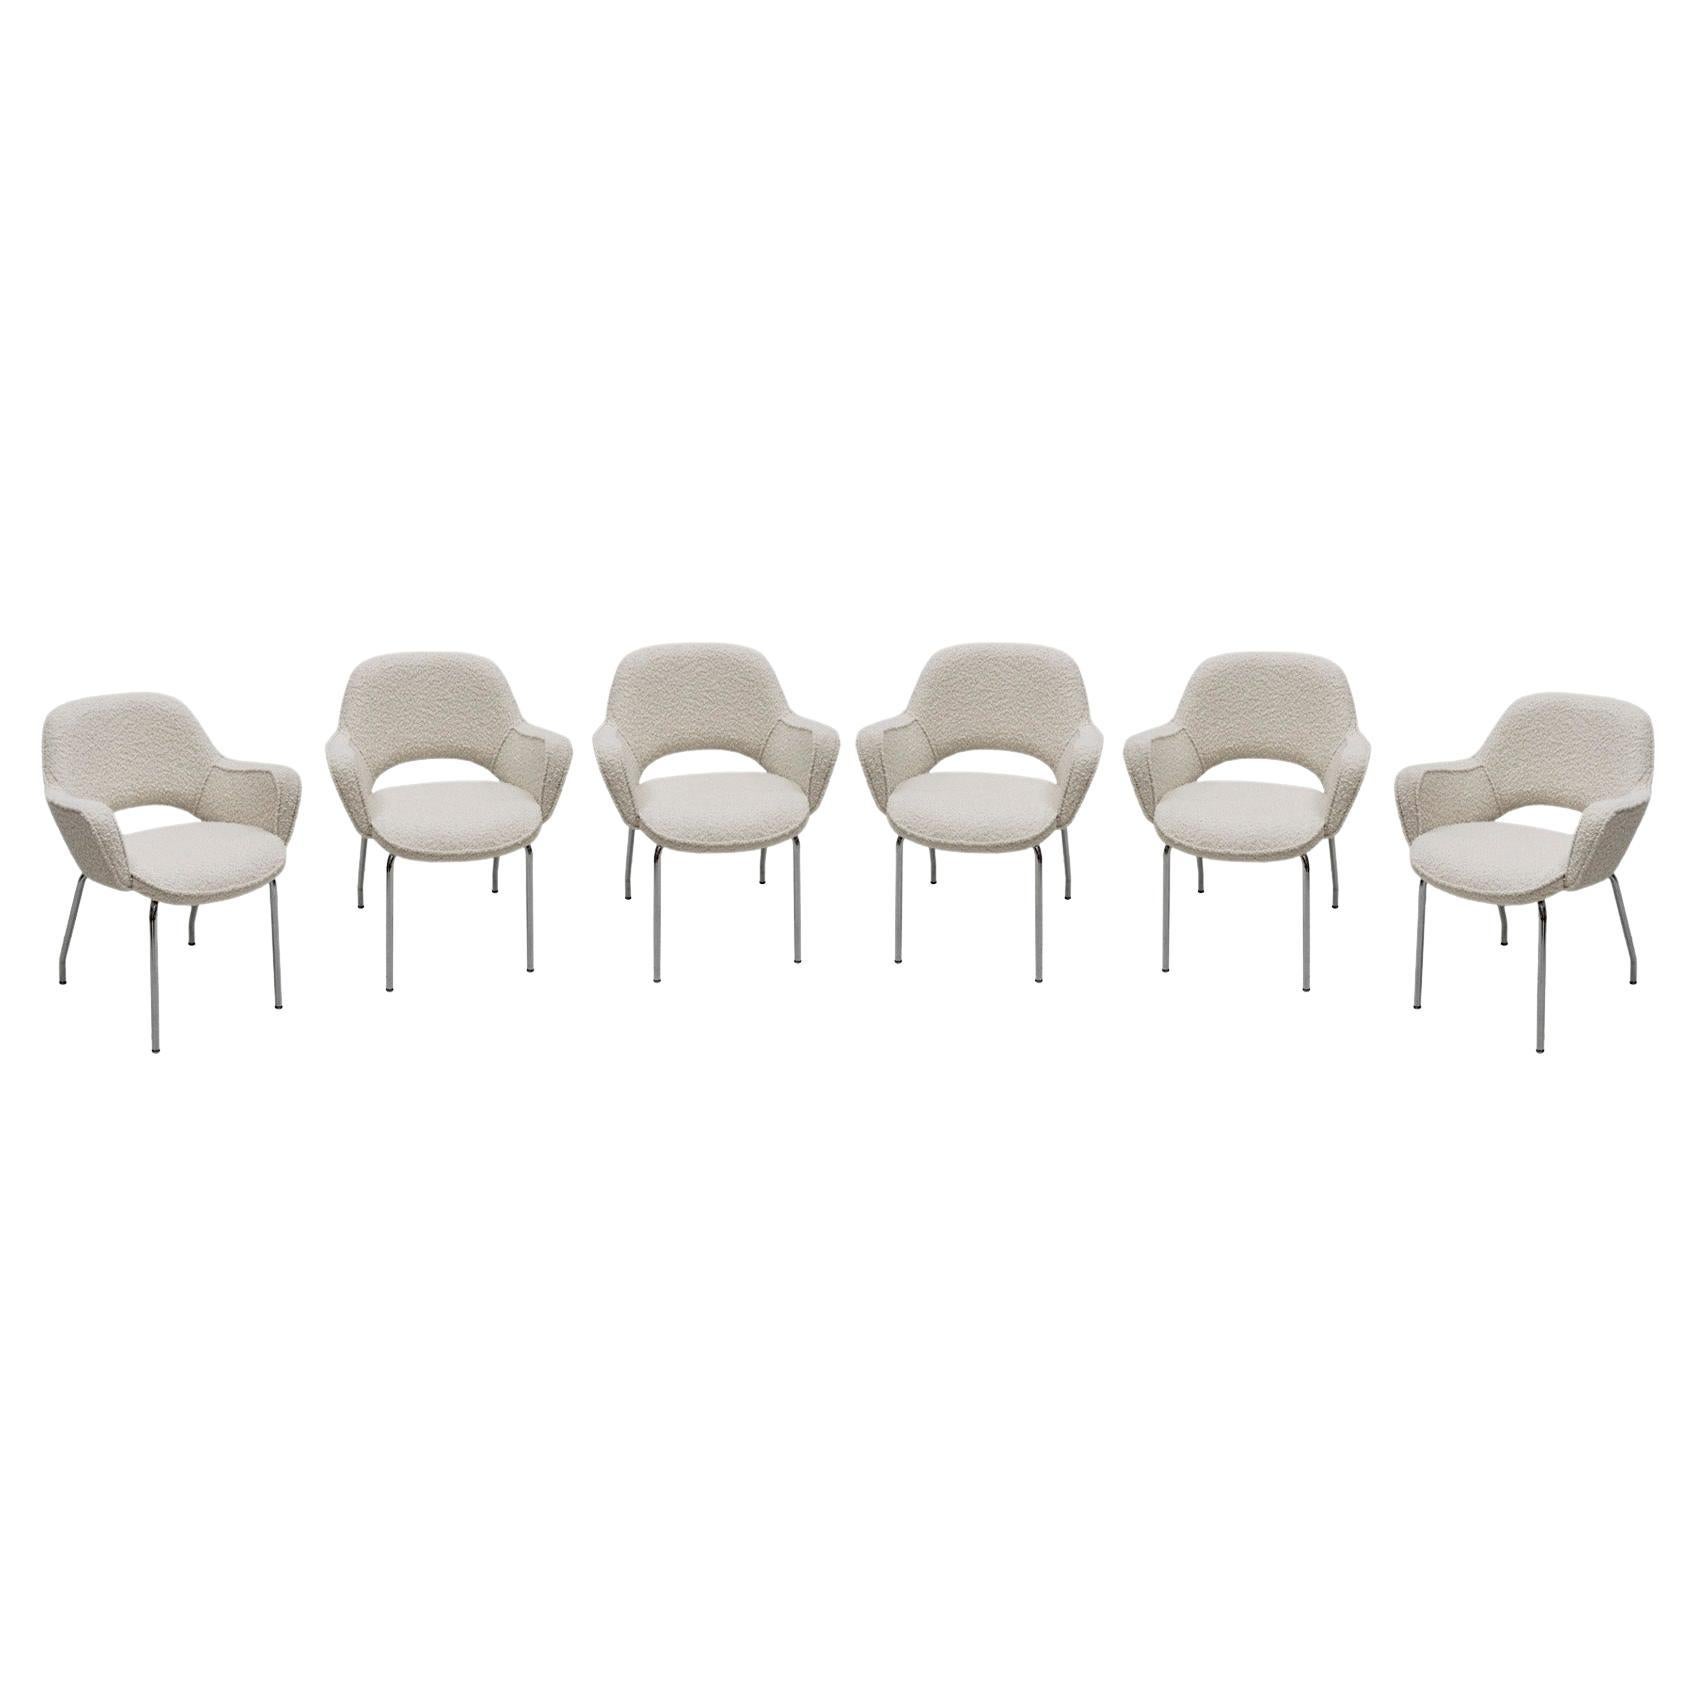 Set of 6 Executive Armchairs Designed By Eero Saarinen for Knoll